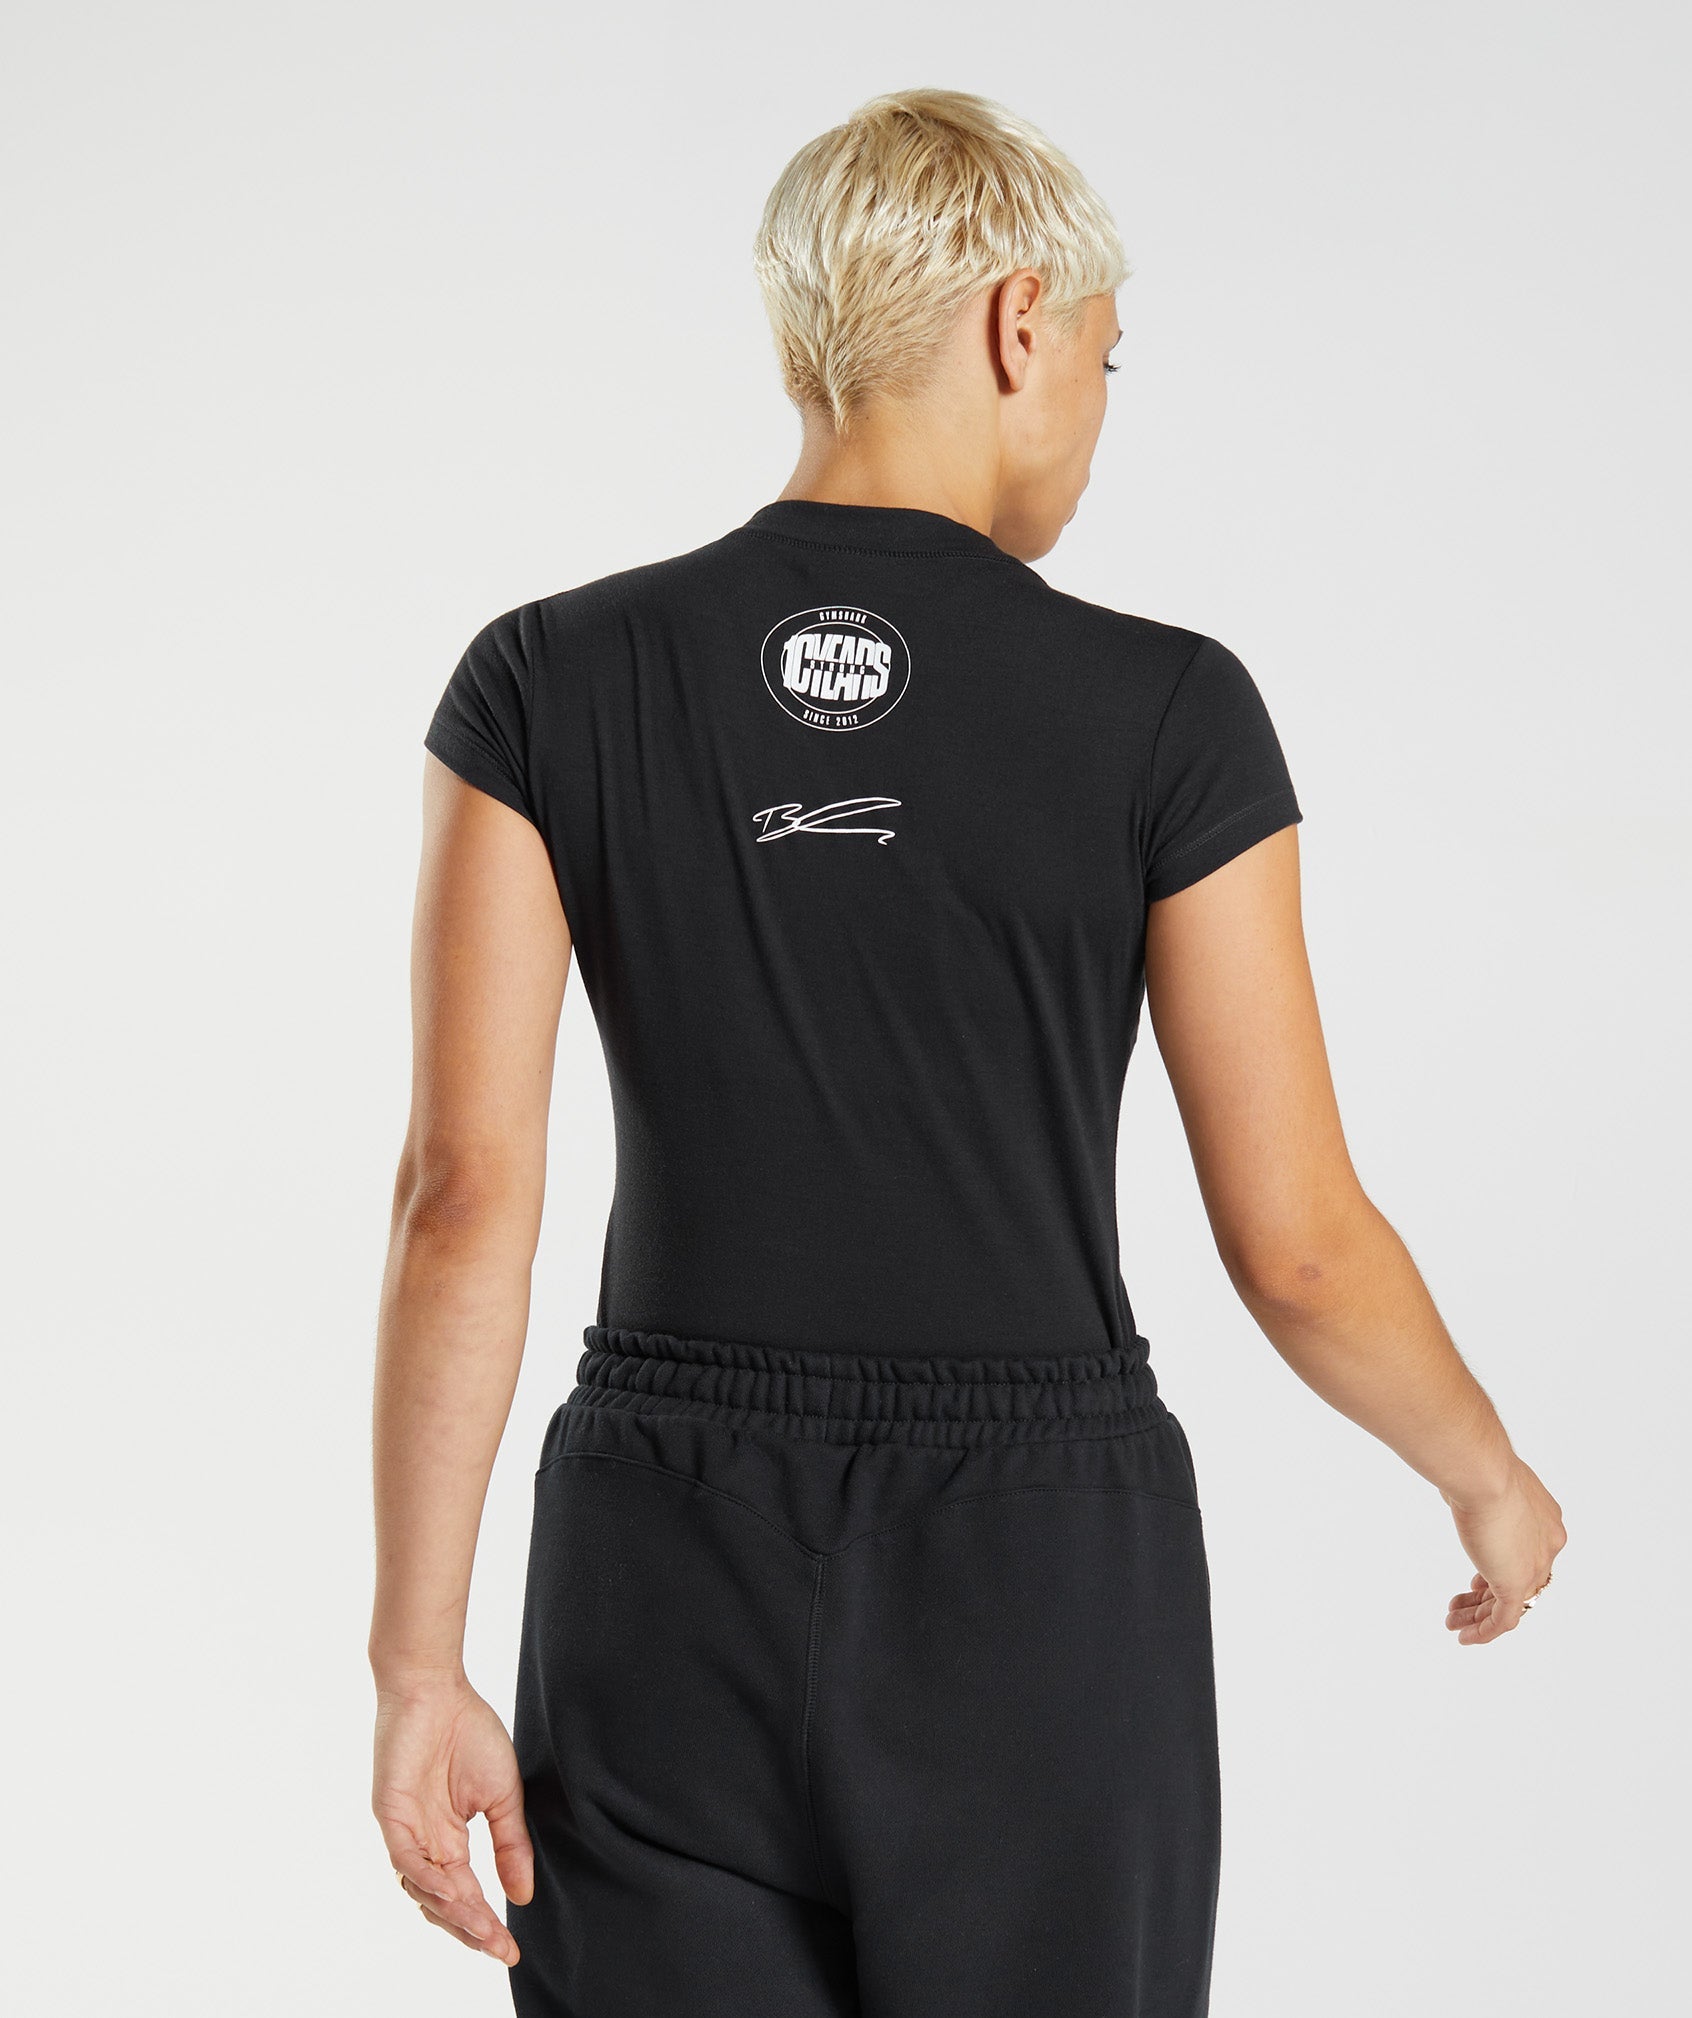 GS10 Year Body Fit T-Shirt in Black - view 2